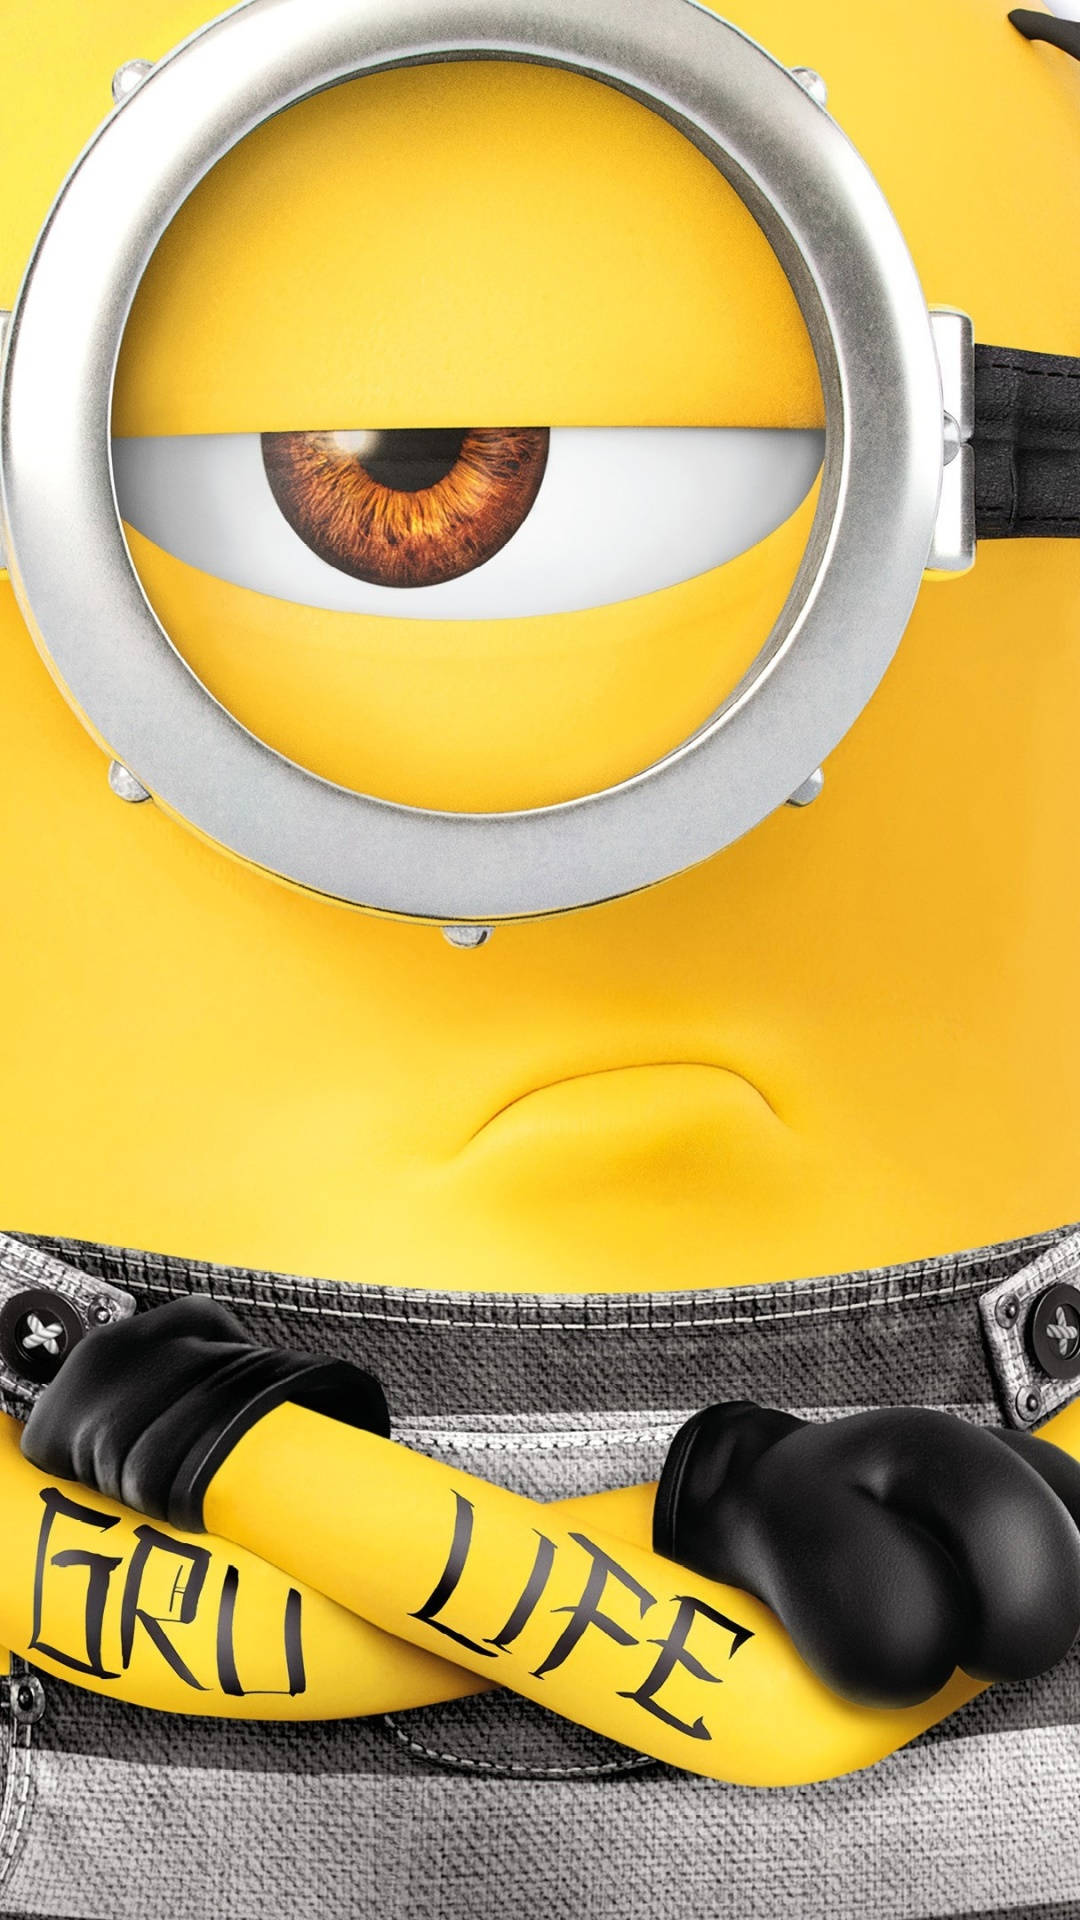 A Poster For The Movie Minions Wallpaper